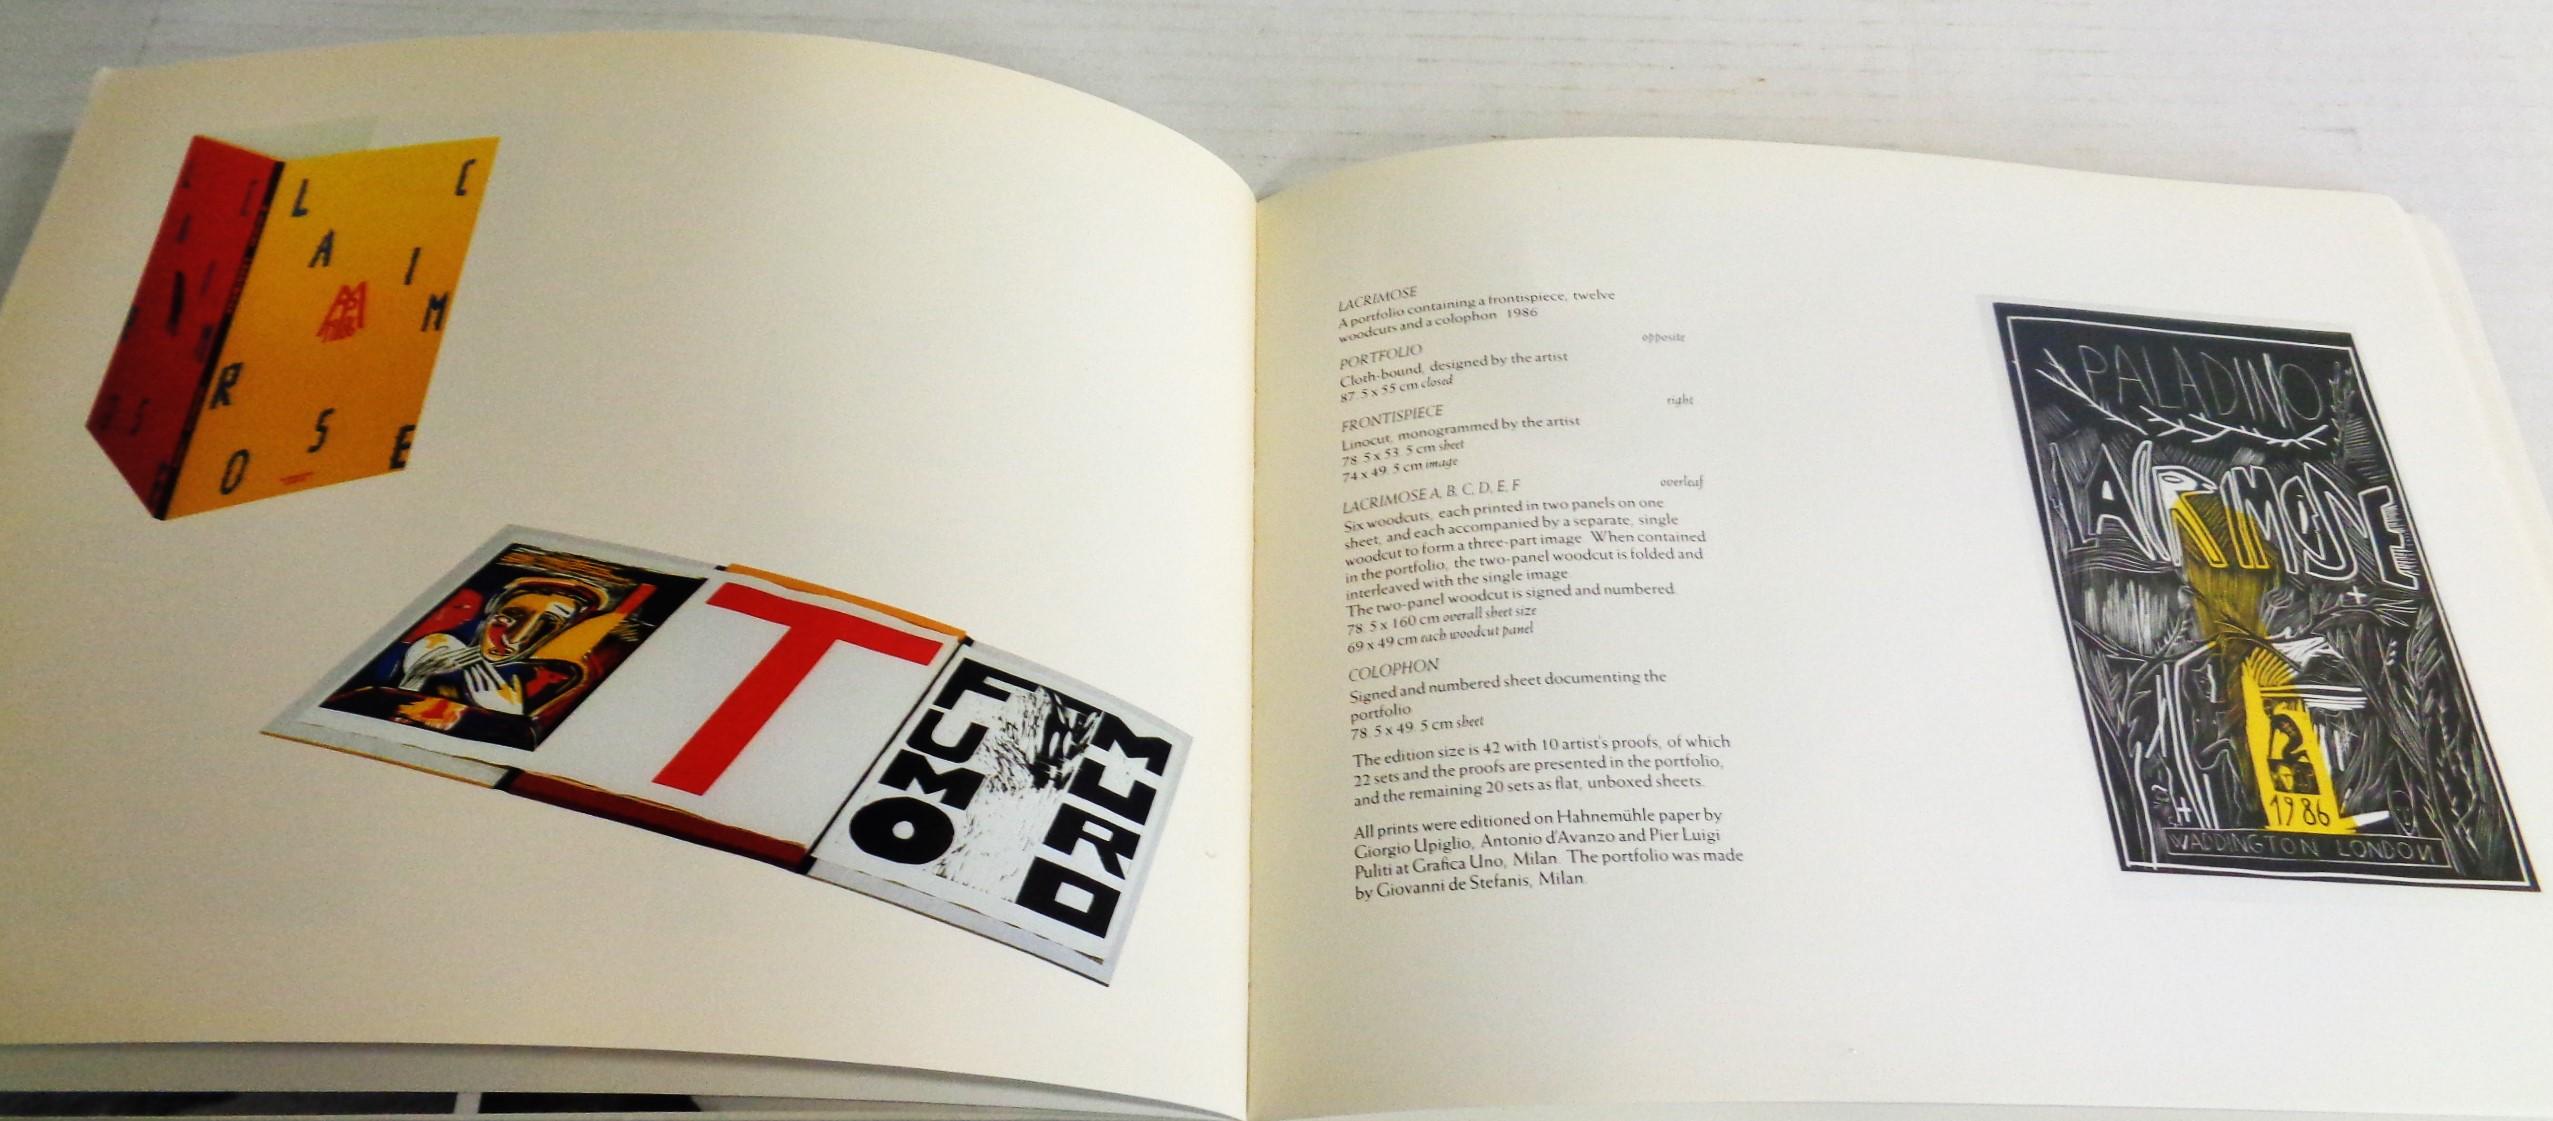 Paper MIMMO PALADINO Etchings Woodcuts and Linocuts 1983 - 1986 - Exhibition Catalogue For Sale